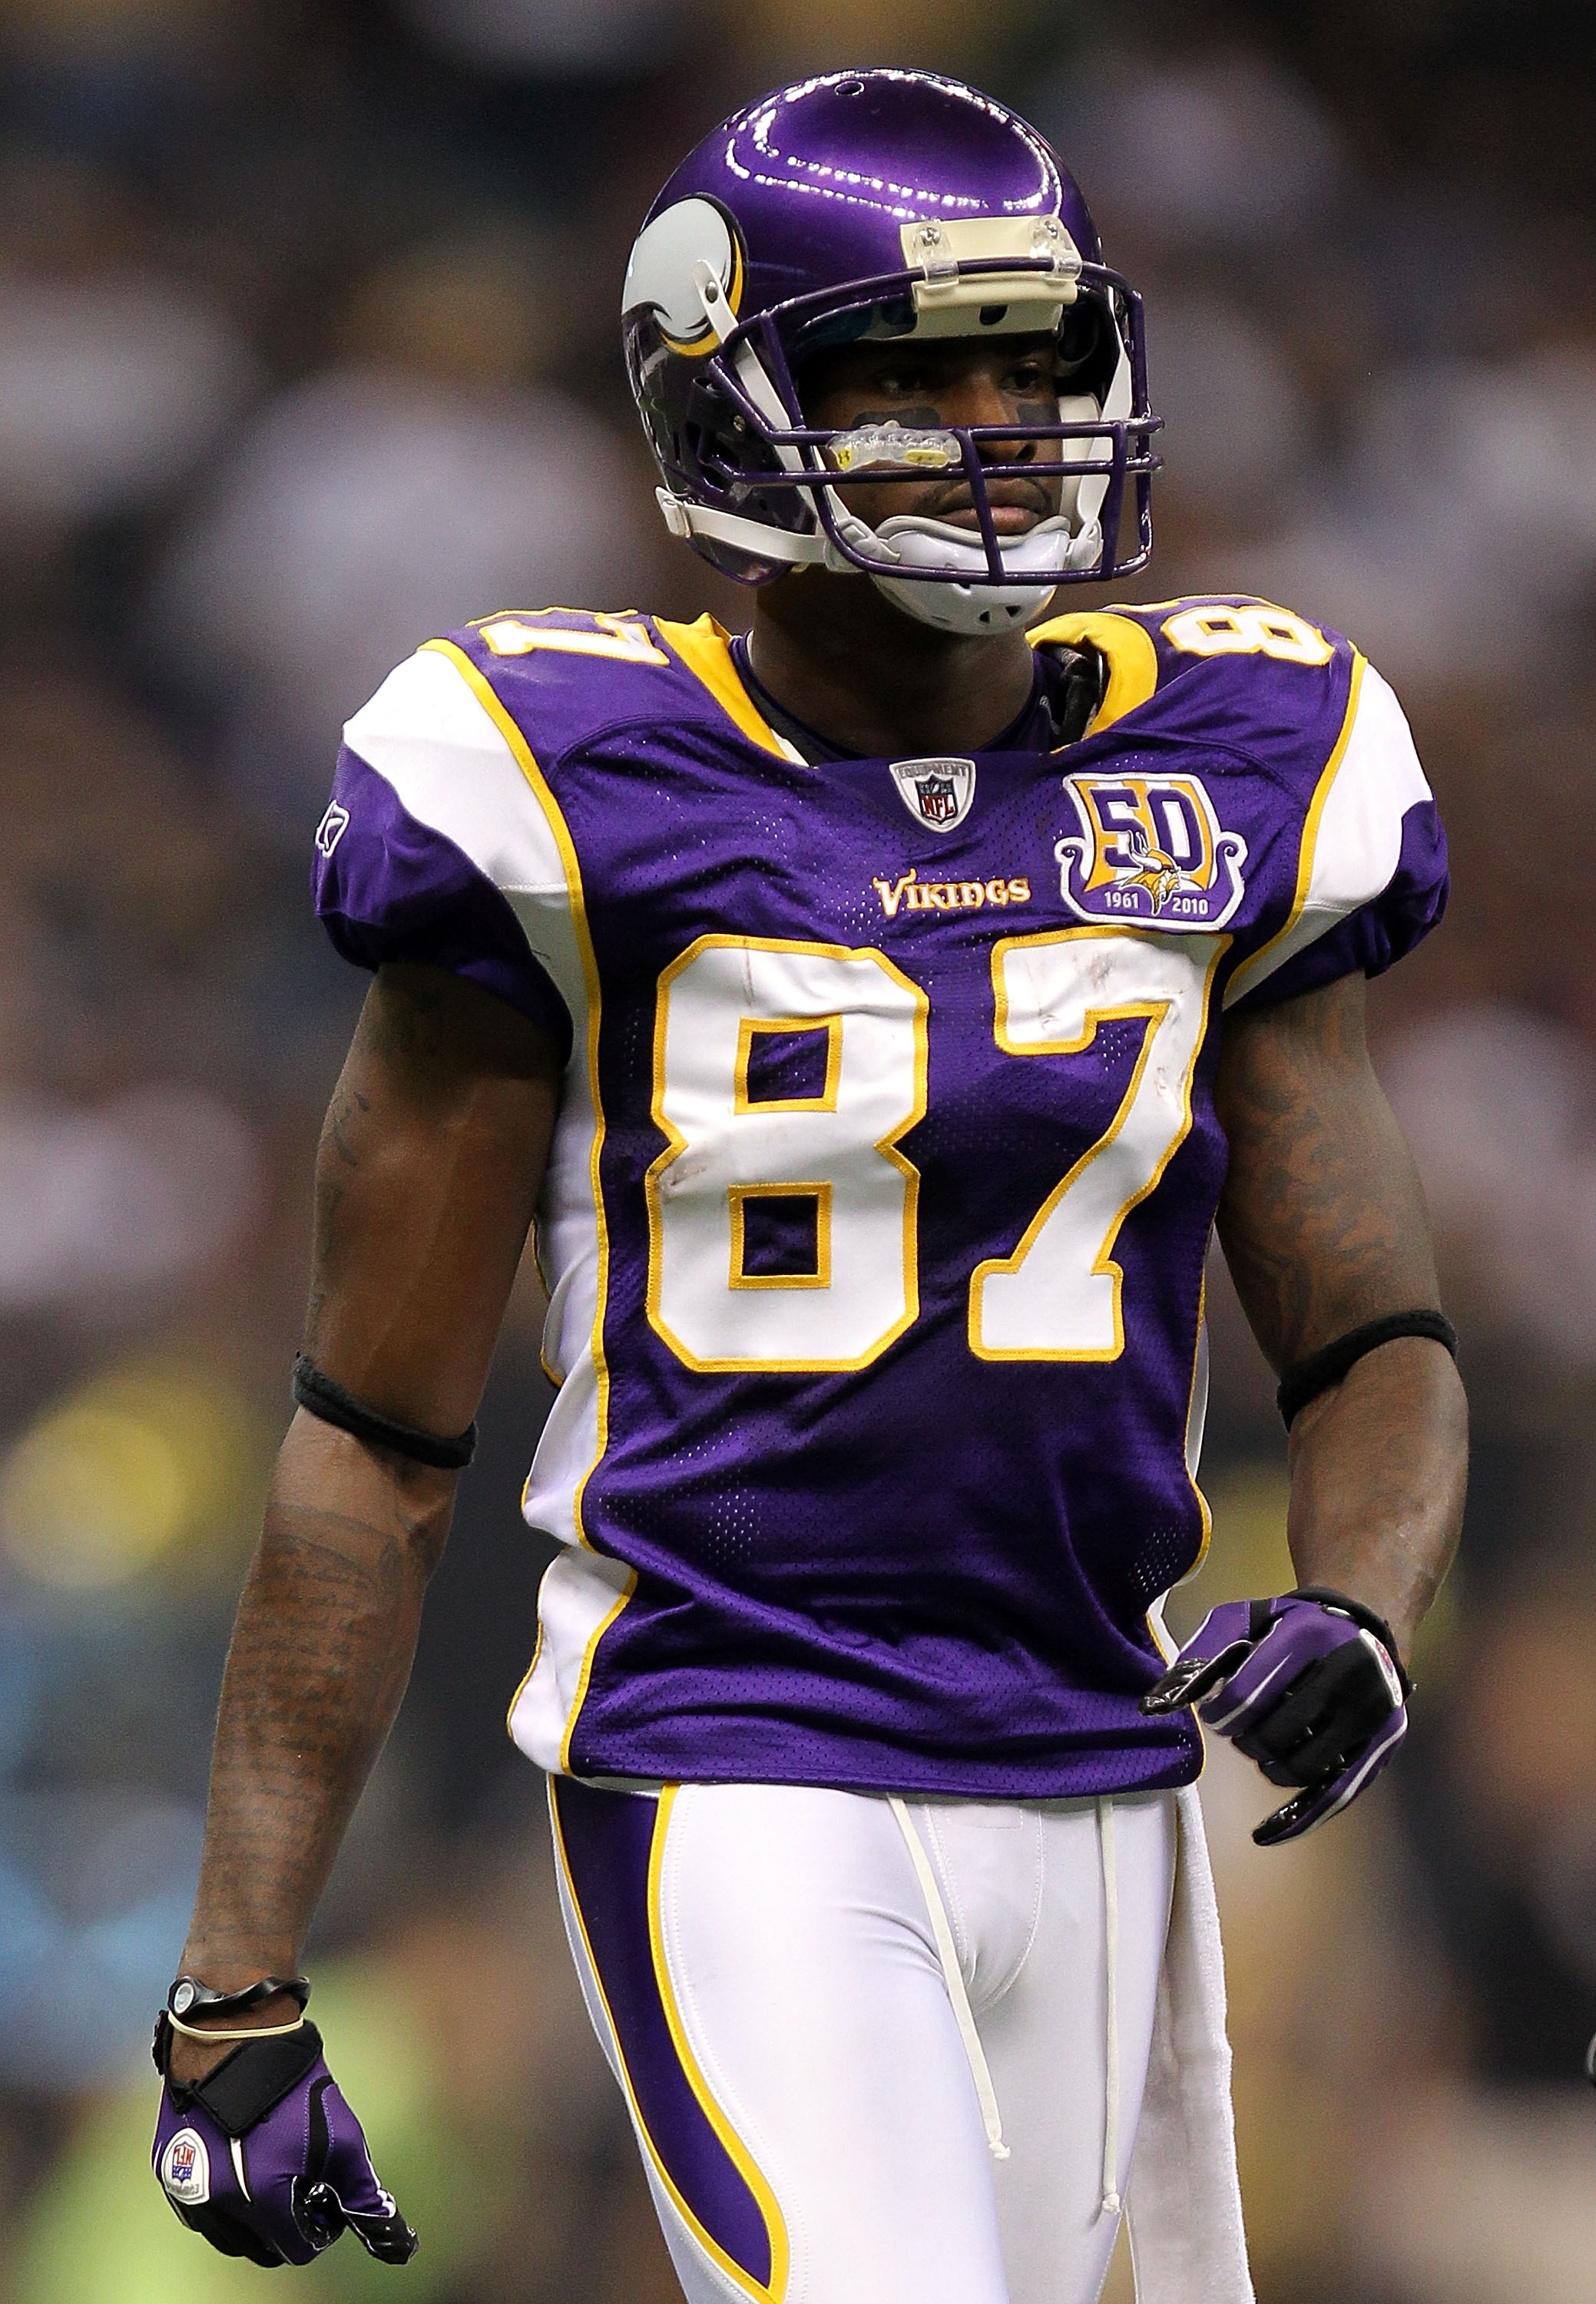 NEW ORLEANS - SEPTEMBER 09:  Bernard Berrian #87 of the Minnesota Vikings at Louisiana Superdome on September 9, 2010 in New Orleans, Louisiana.  (Photo by Ronald Martinez/Getty Images)